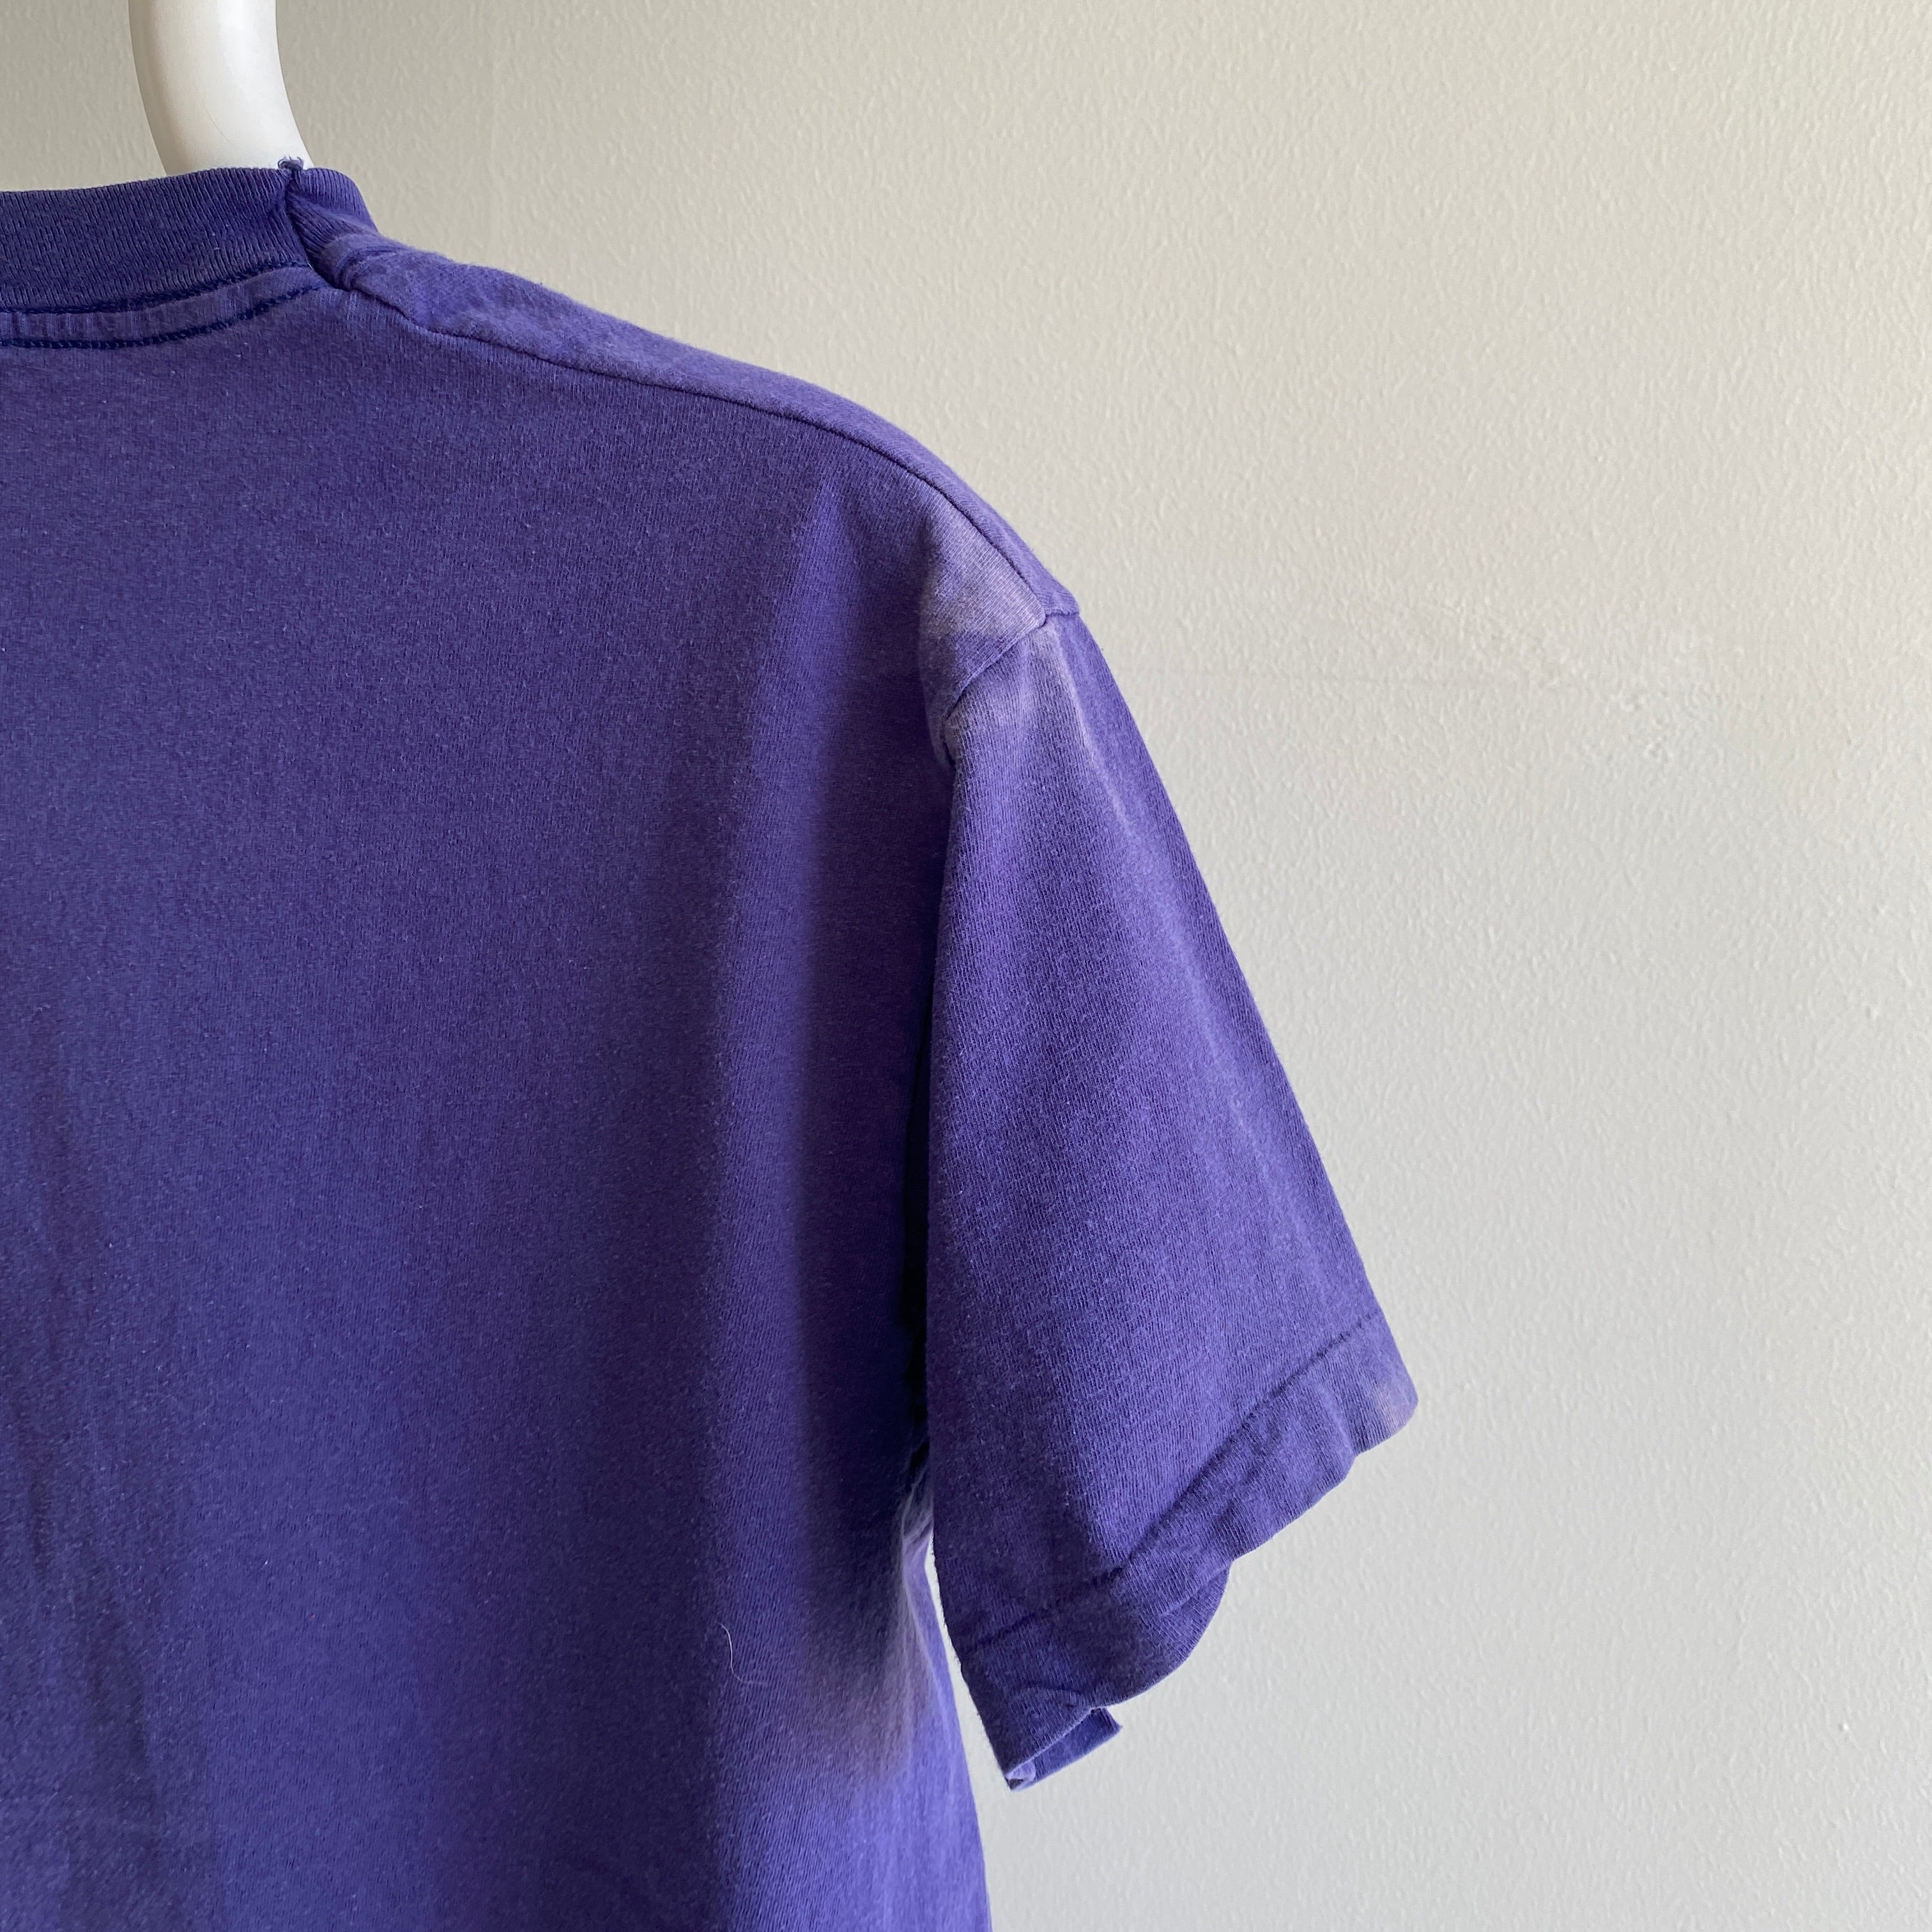 1980s Sun Faded Navy/Violet Blank Cotton Triangle Pocket T-Shirt